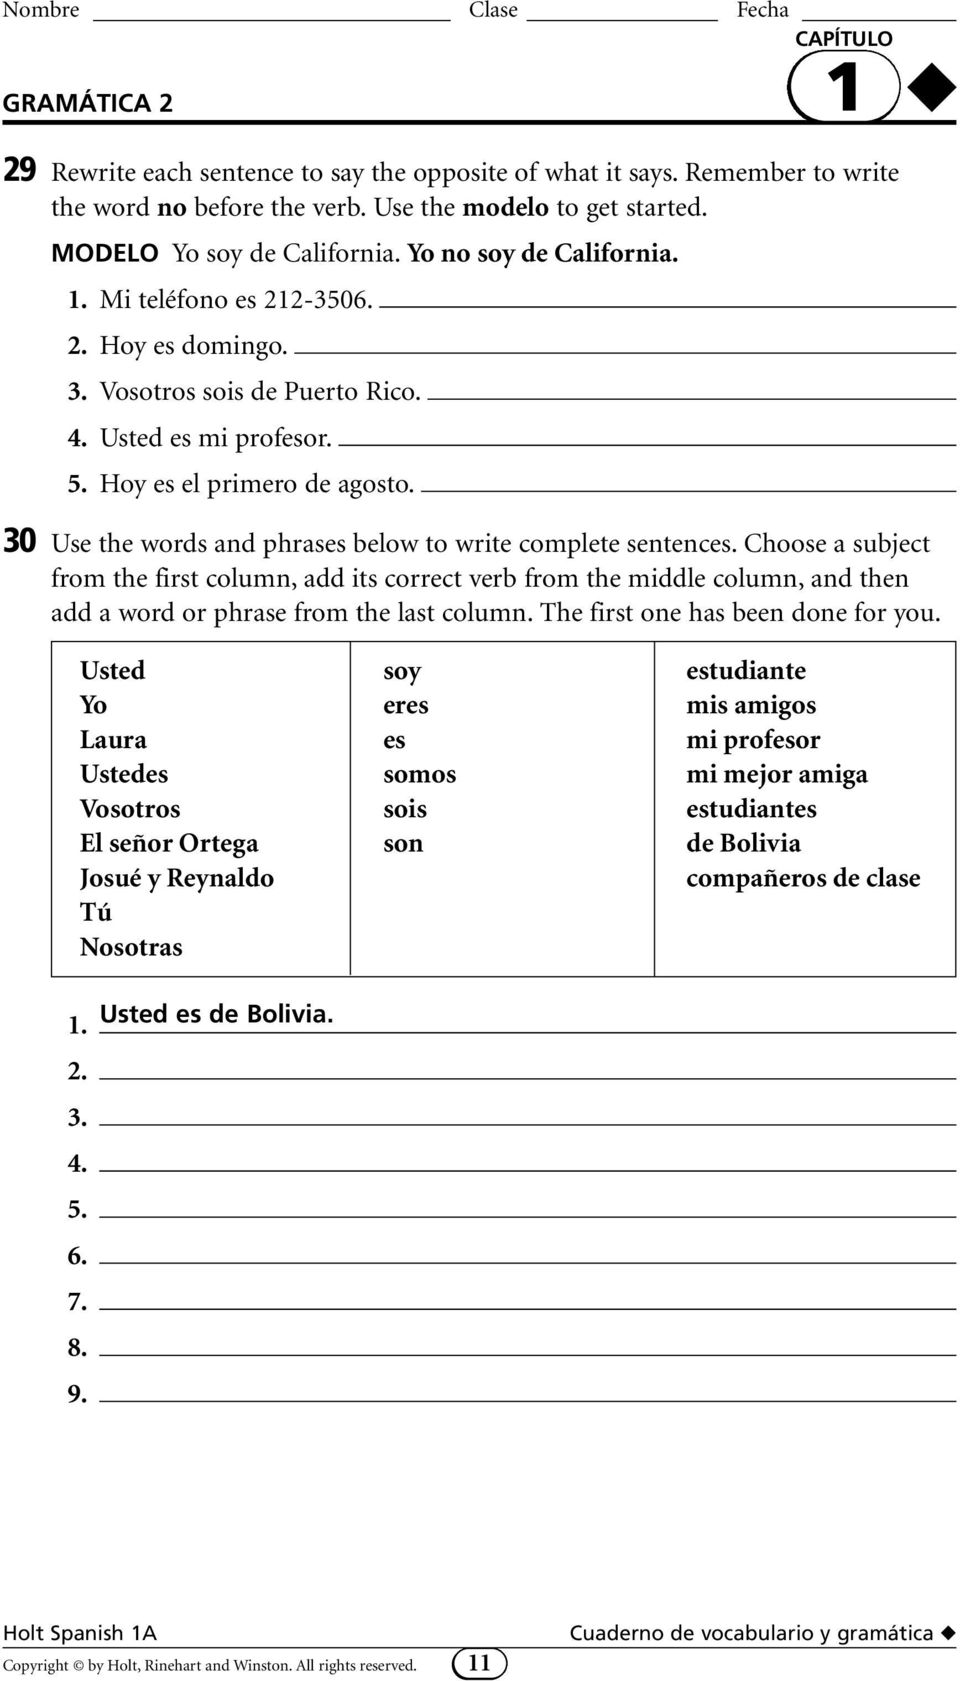 30 Use the words and phrases below to write complete sentences. Choose a subject from the first column, add its correct verb from the middle column, and then add a word or phrase from the last column.